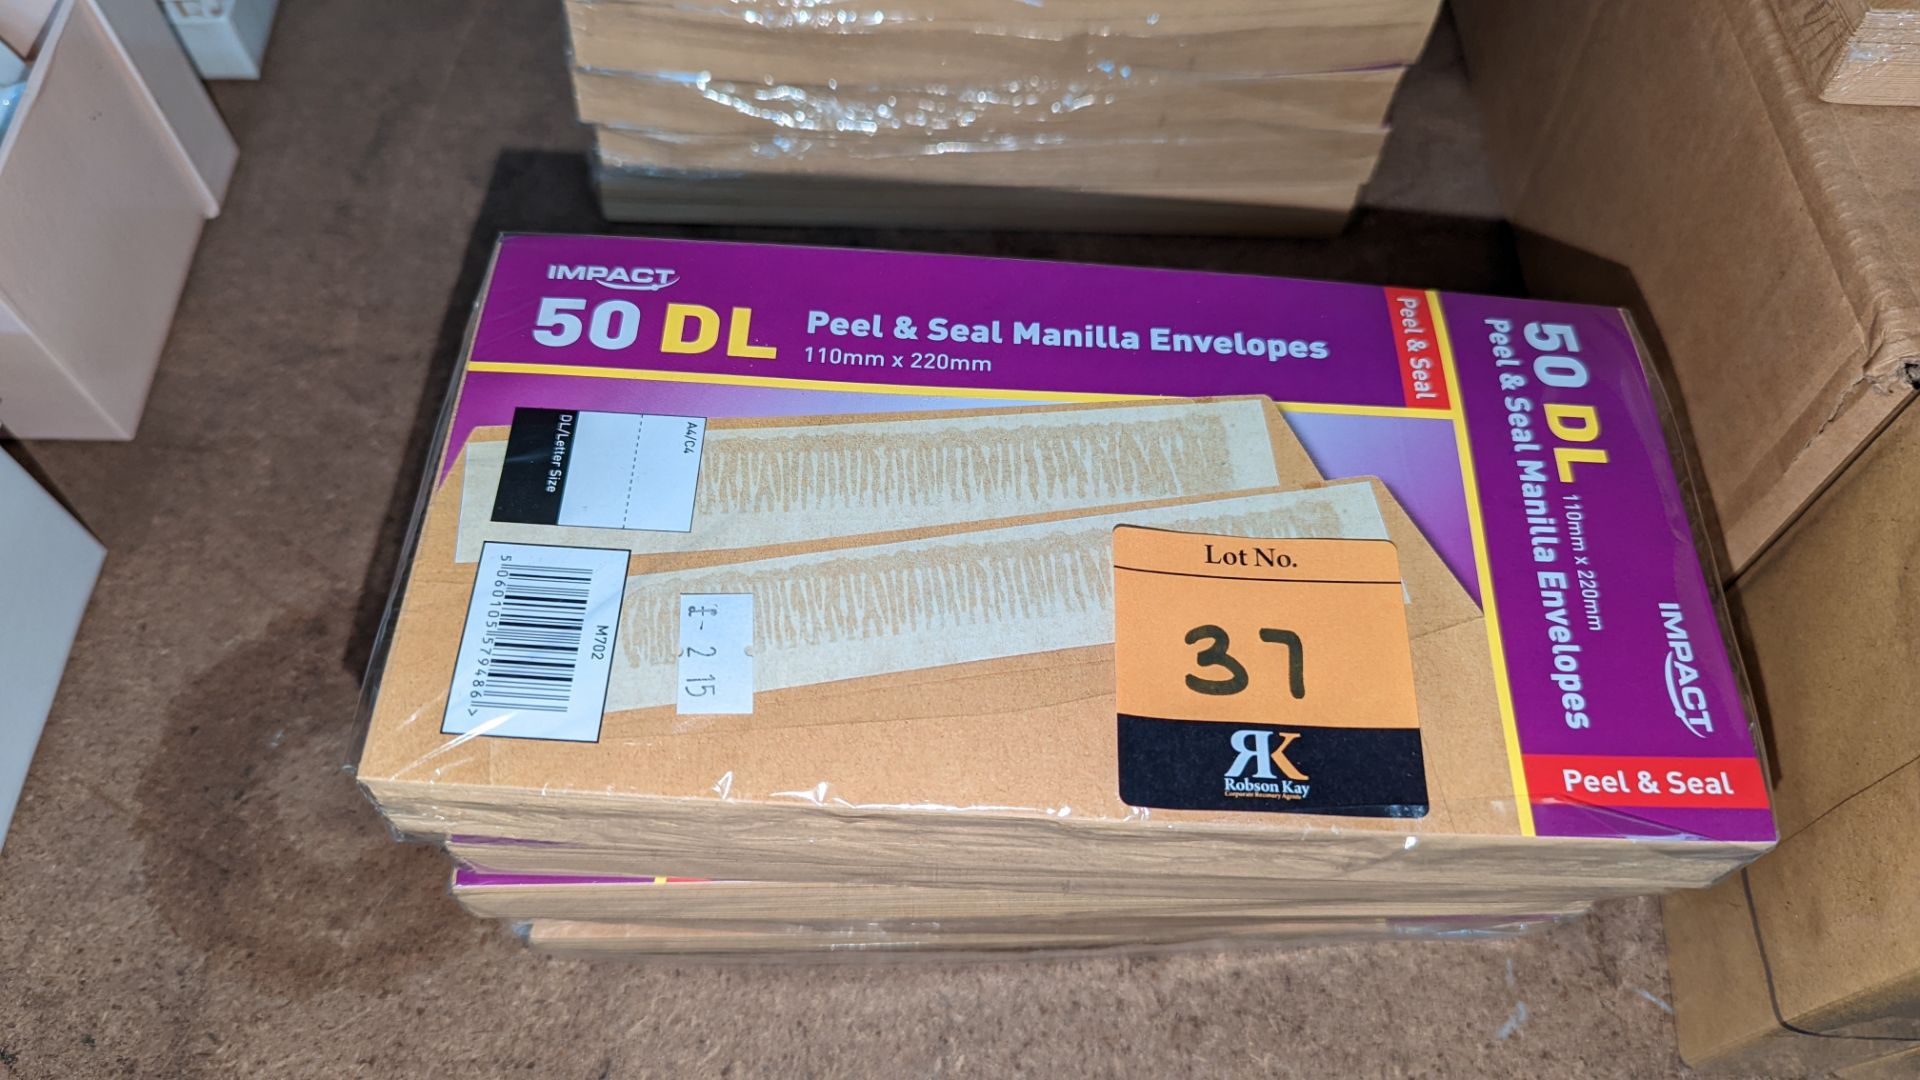 51 packs each containing 50 C6 or DL peel & seal manilla envelopes - Image 3 of 8